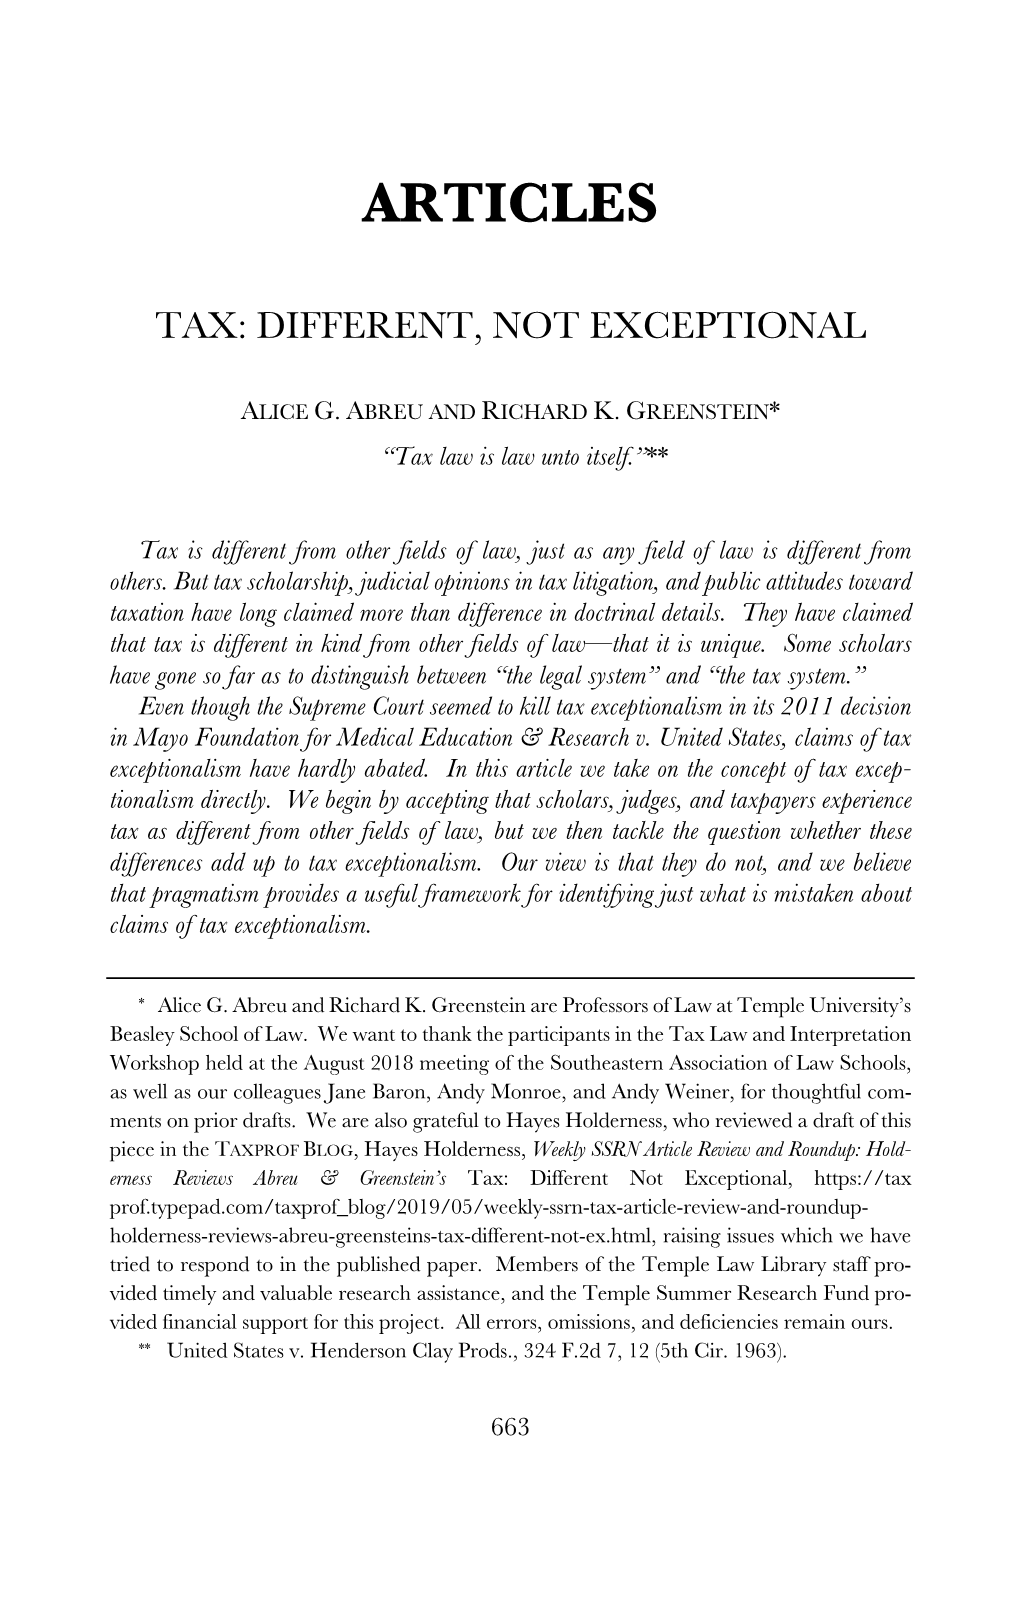 Tax: Different Not Exceptional, Tax: Different Not (D DOCX 2